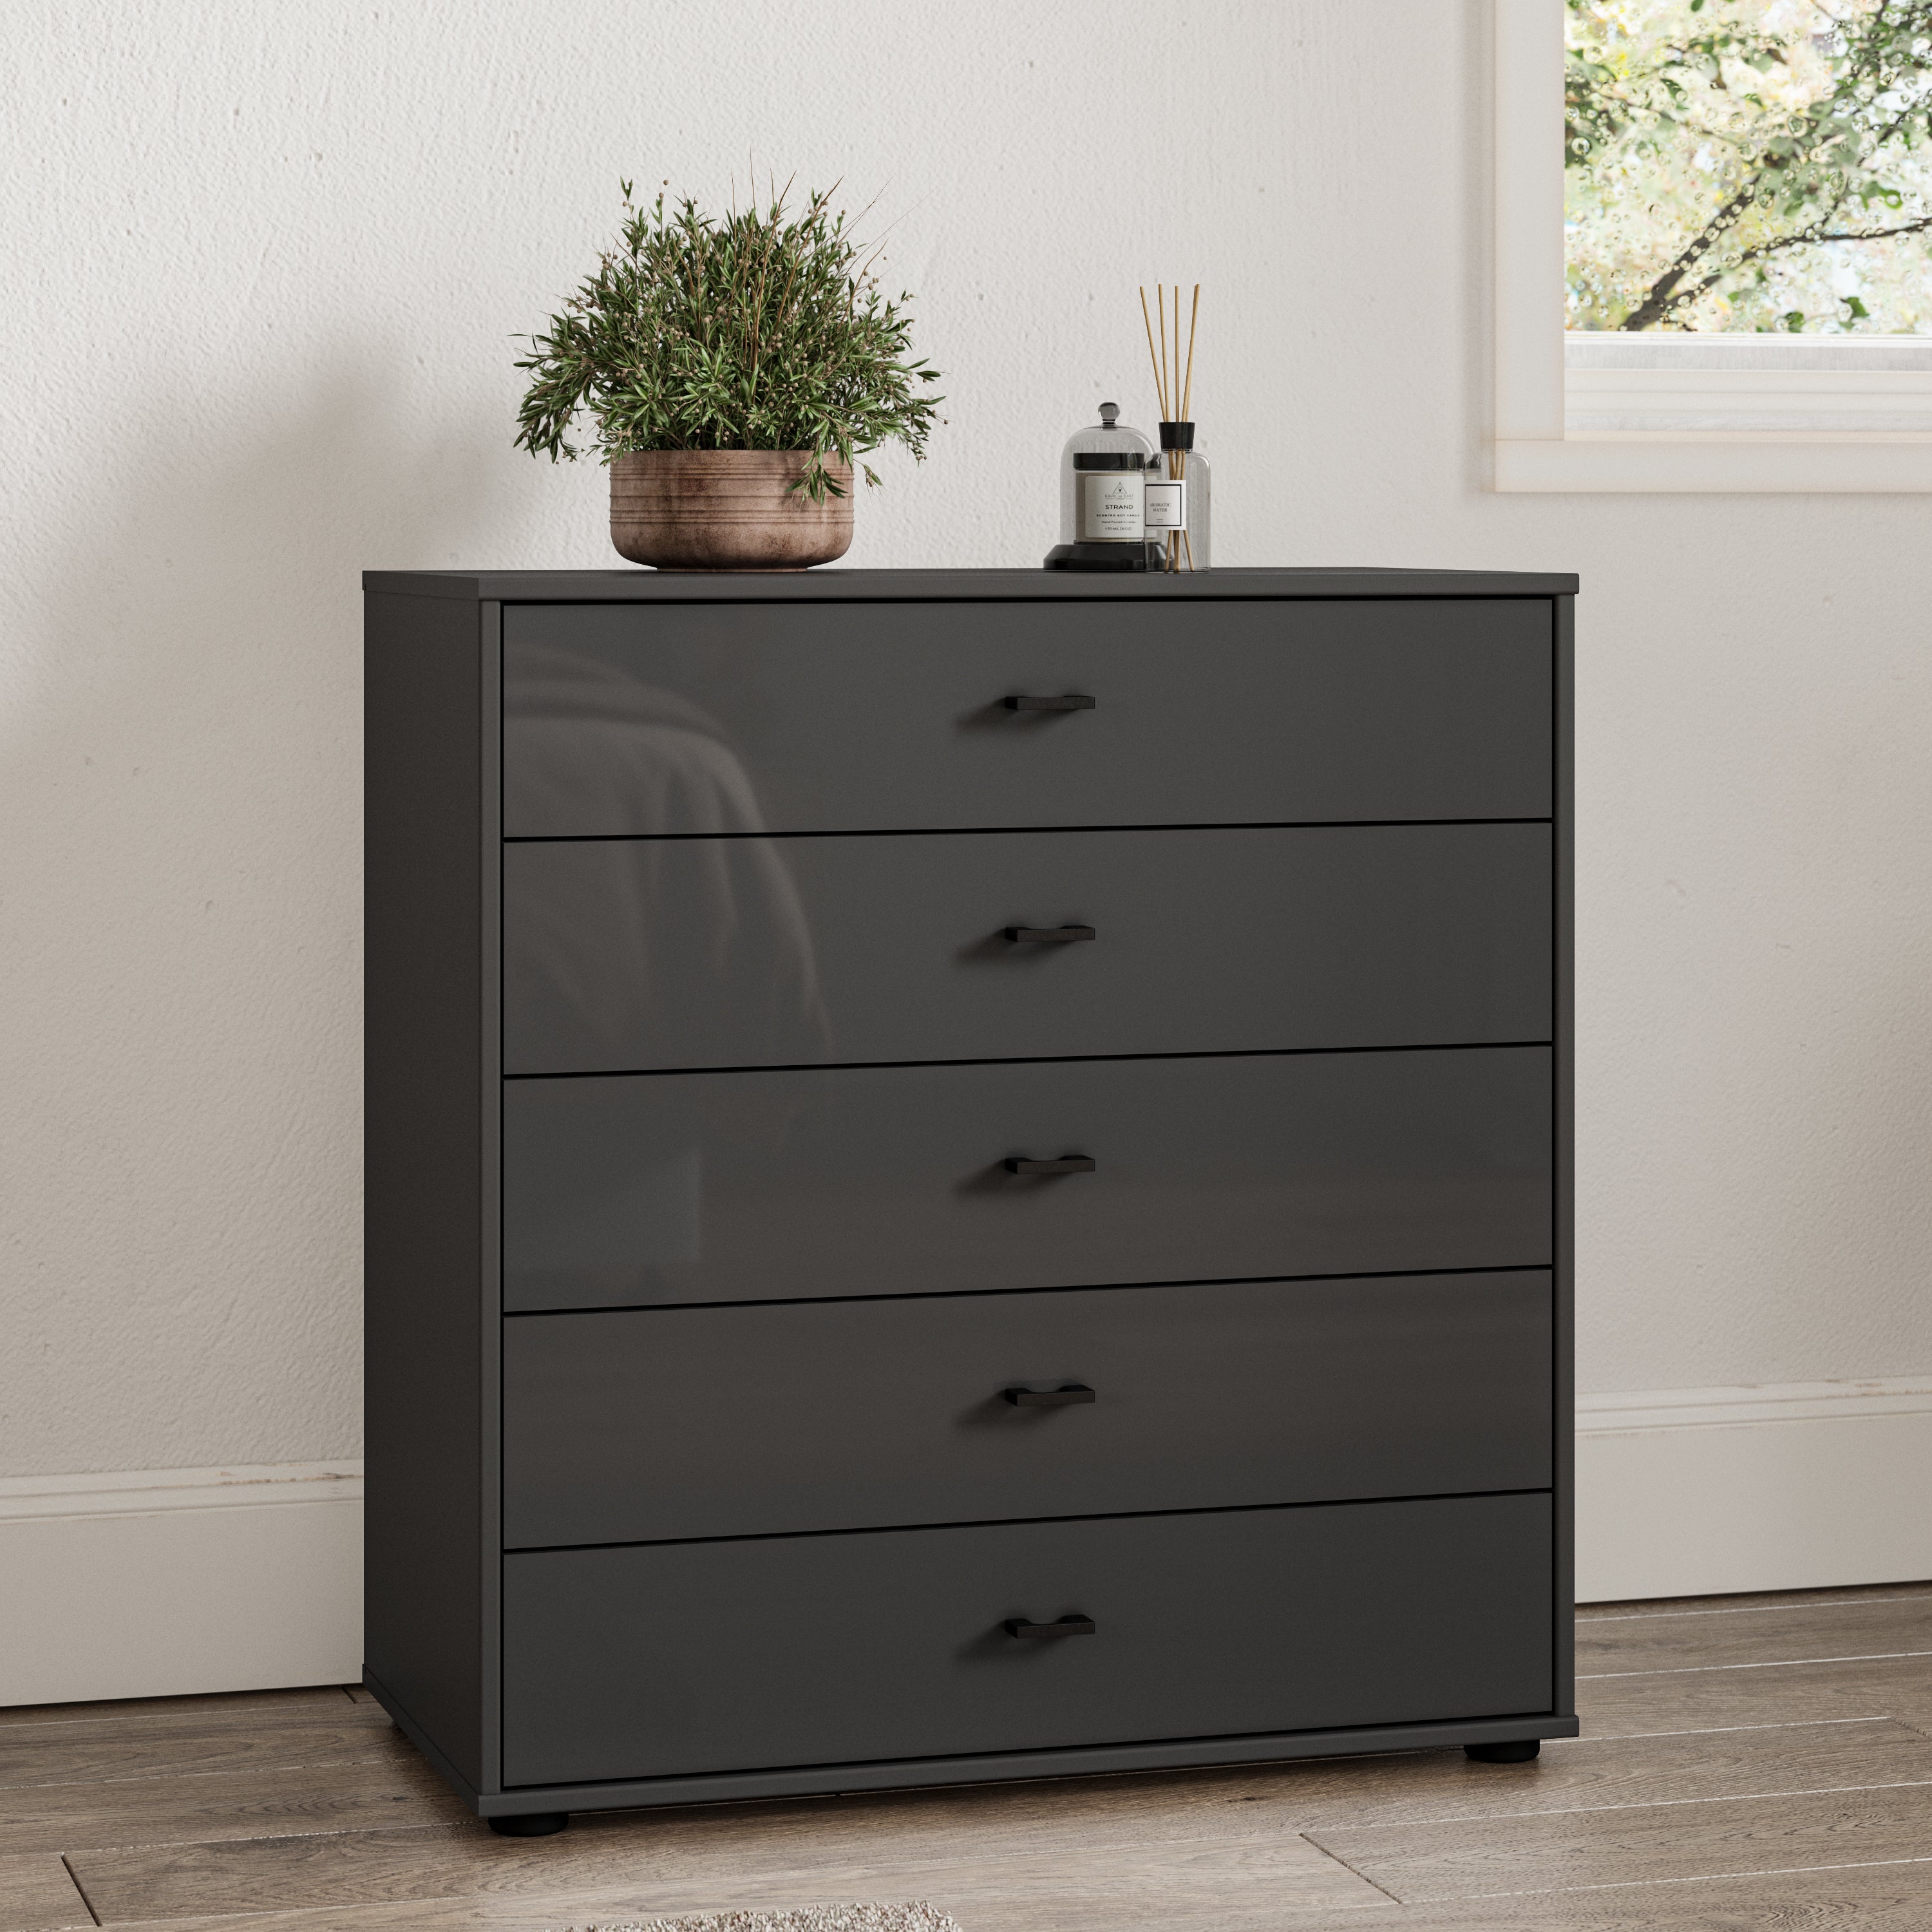 Kahla Glass Fronted Large 5 Drawer Chest Dark Grey